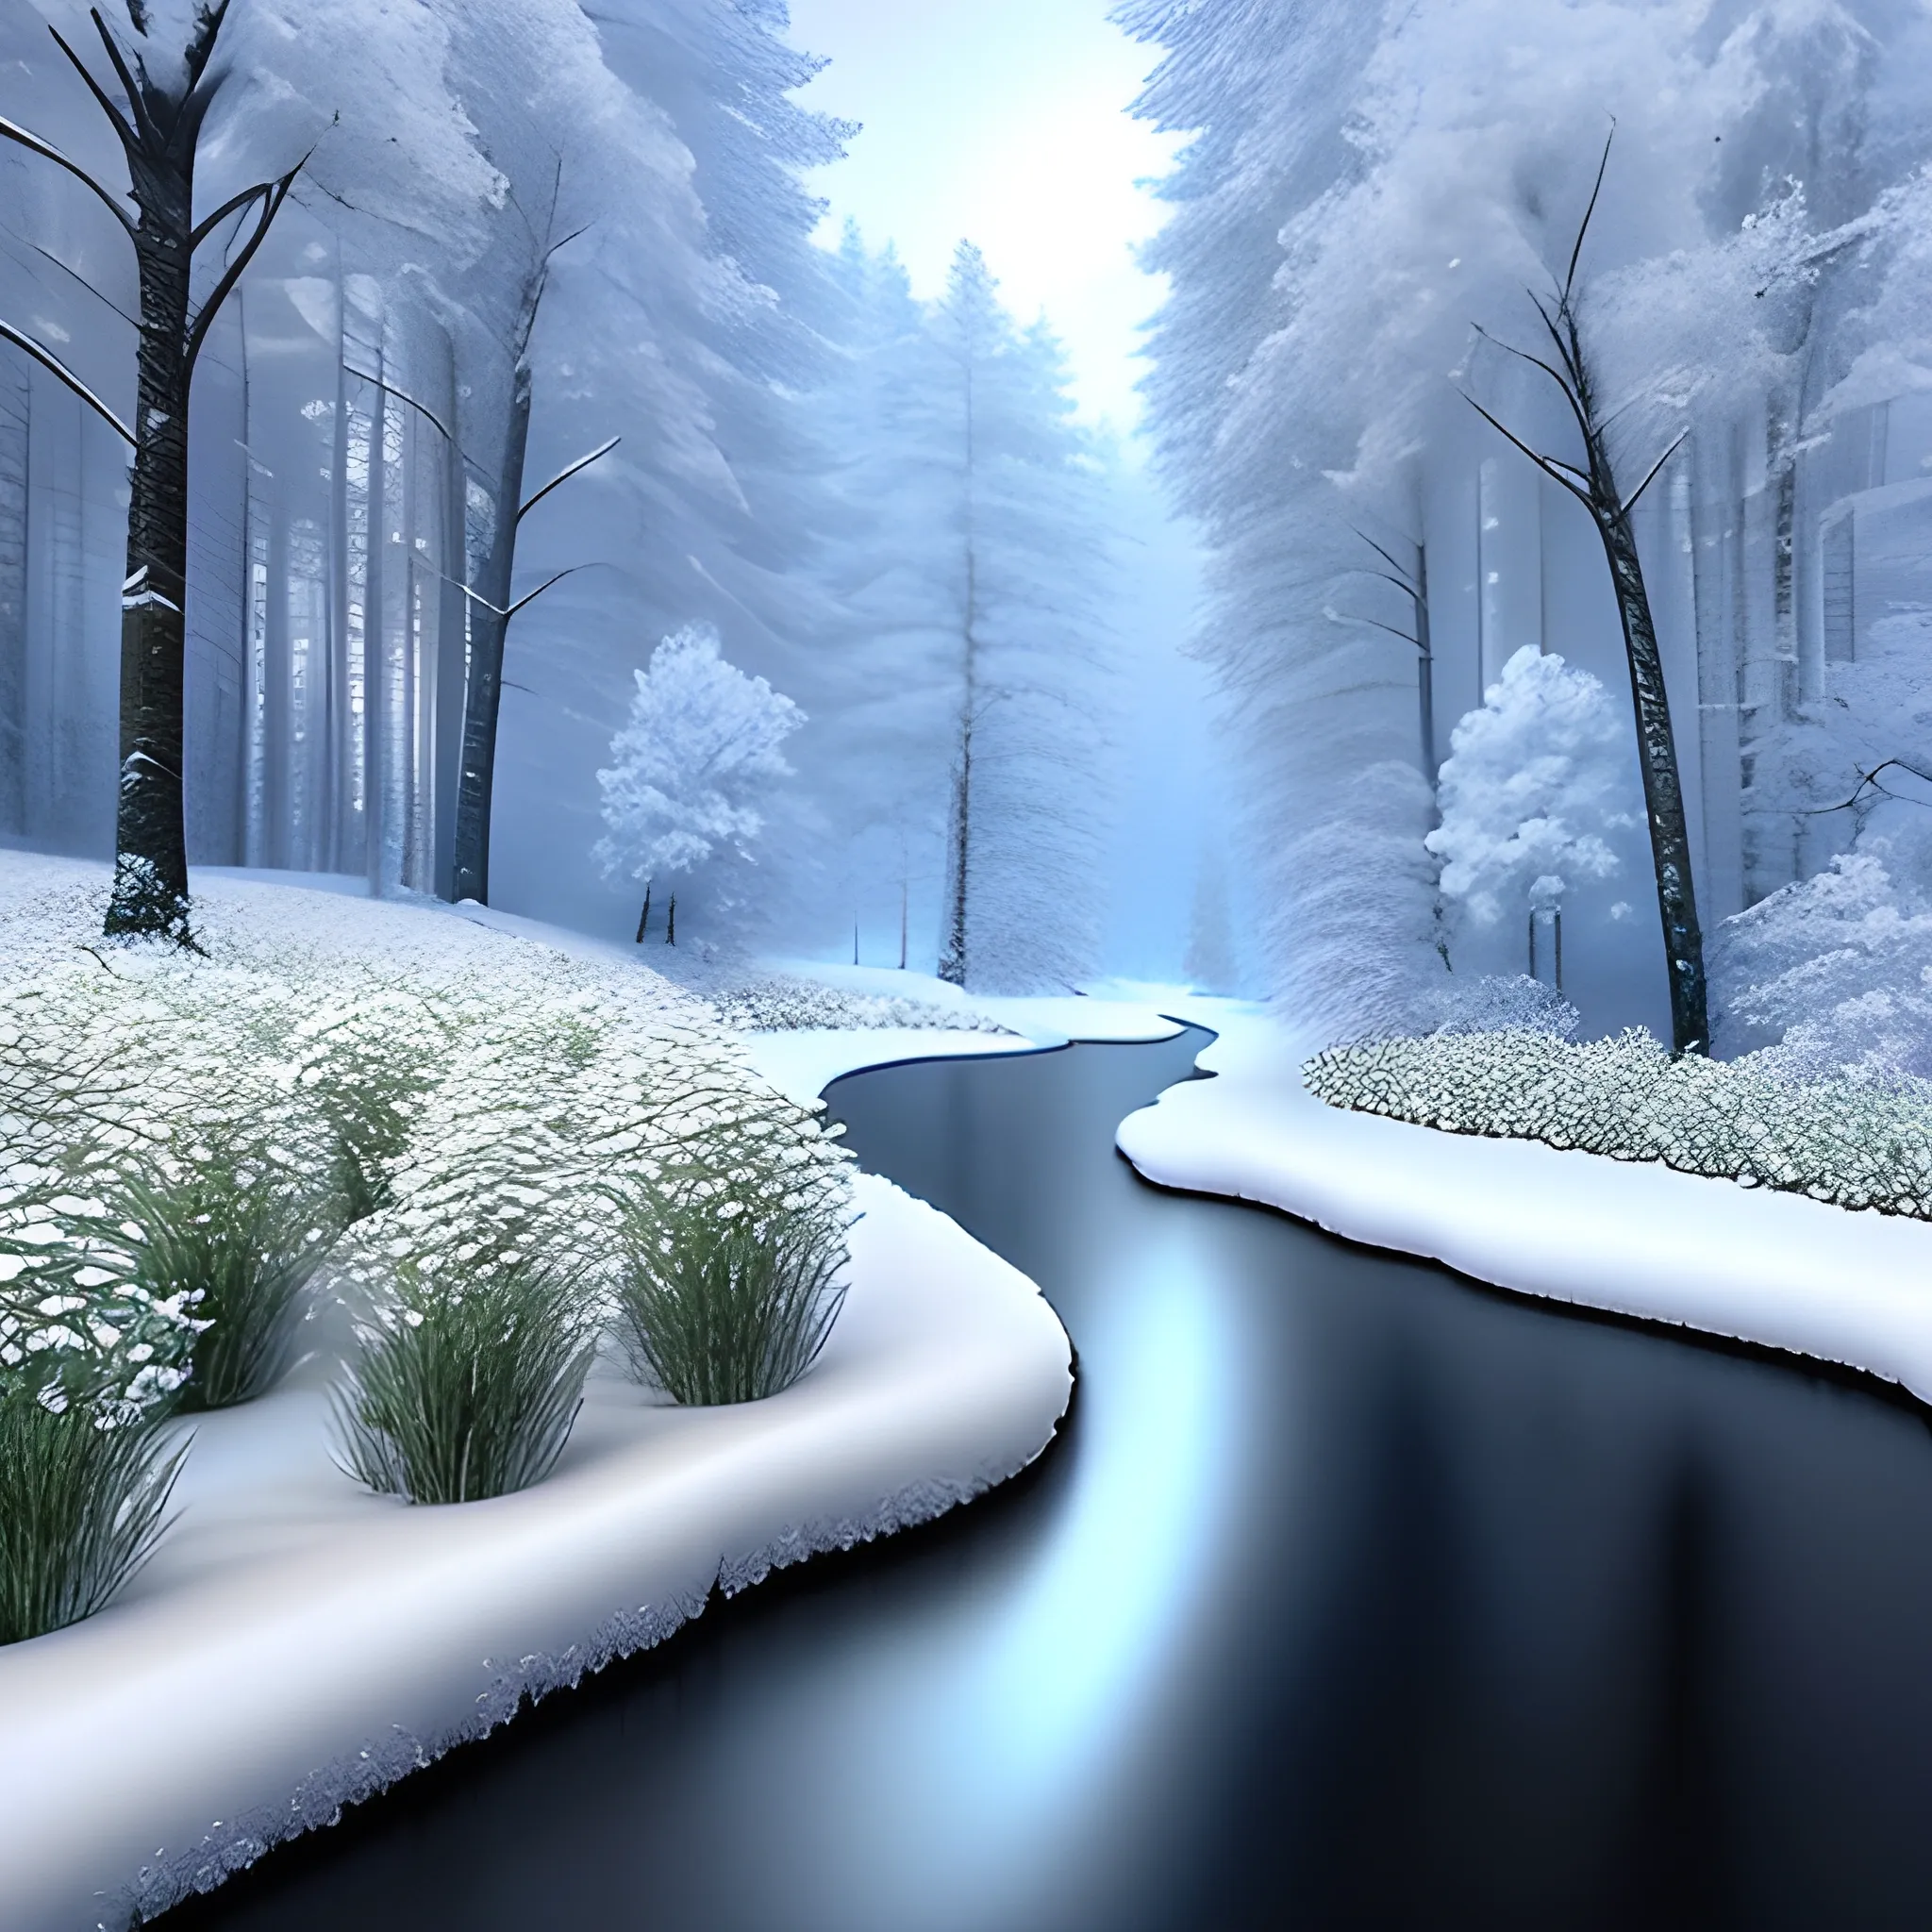 winter scenery, windy falling snow, snowy field with dark trees and a little river or lake in the middle, some white winter flowers, dark forest theme, sunrays between the trees, 3D, Trippy